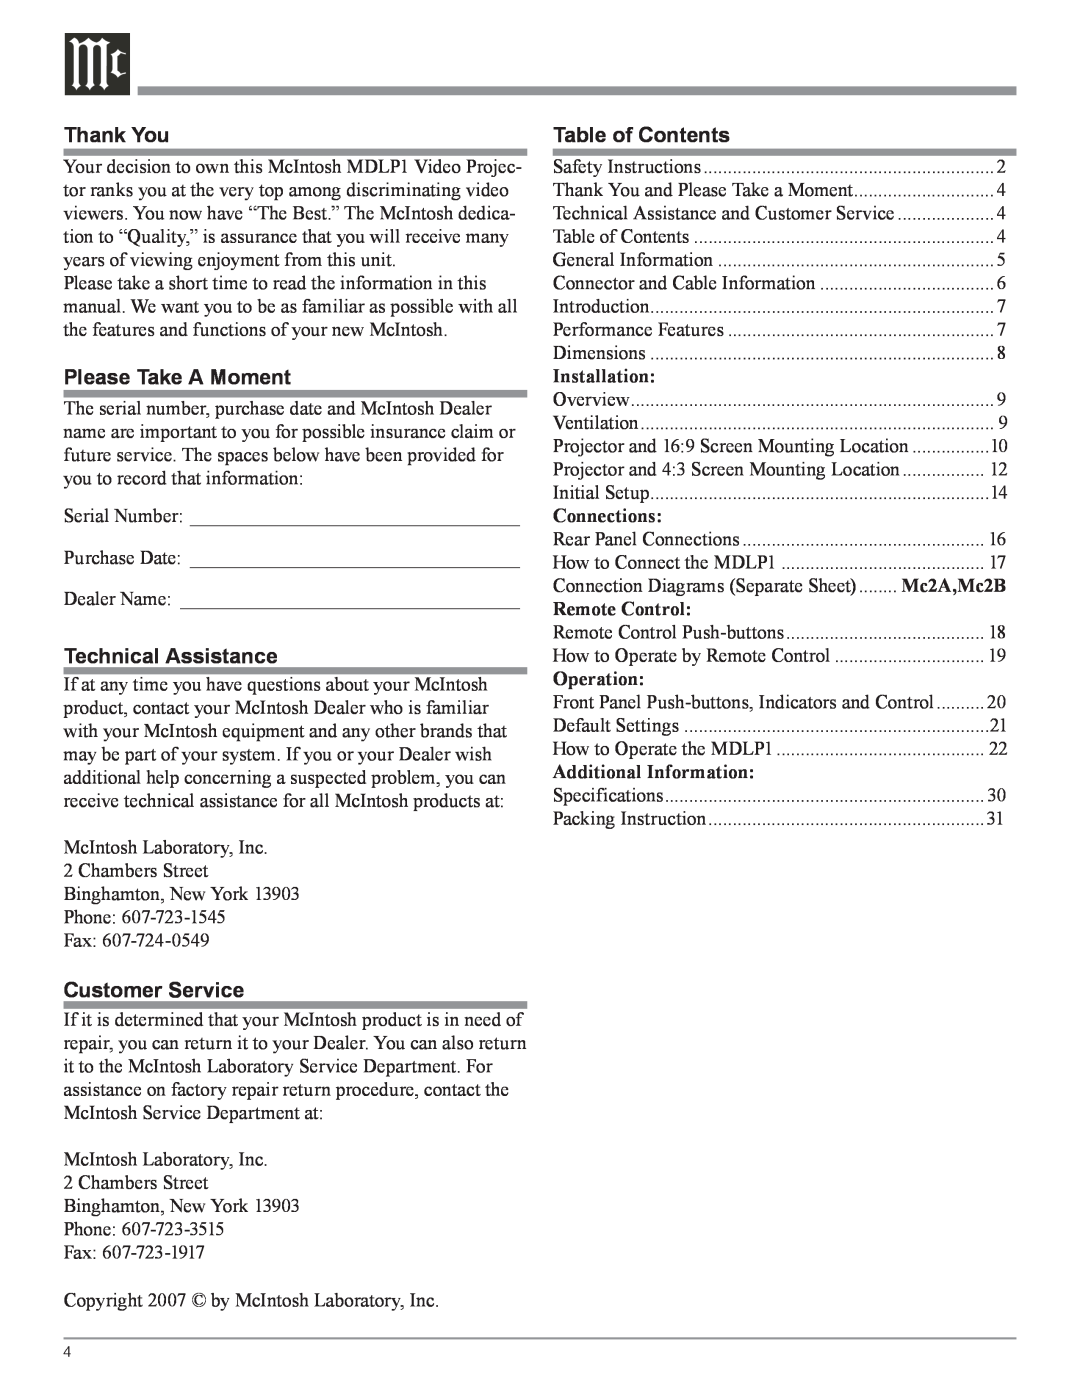 McIntosh MDLP1 owner manual Thank You, Please Take A Moment, Technical Assistance, Customer Service, Table of Contents 